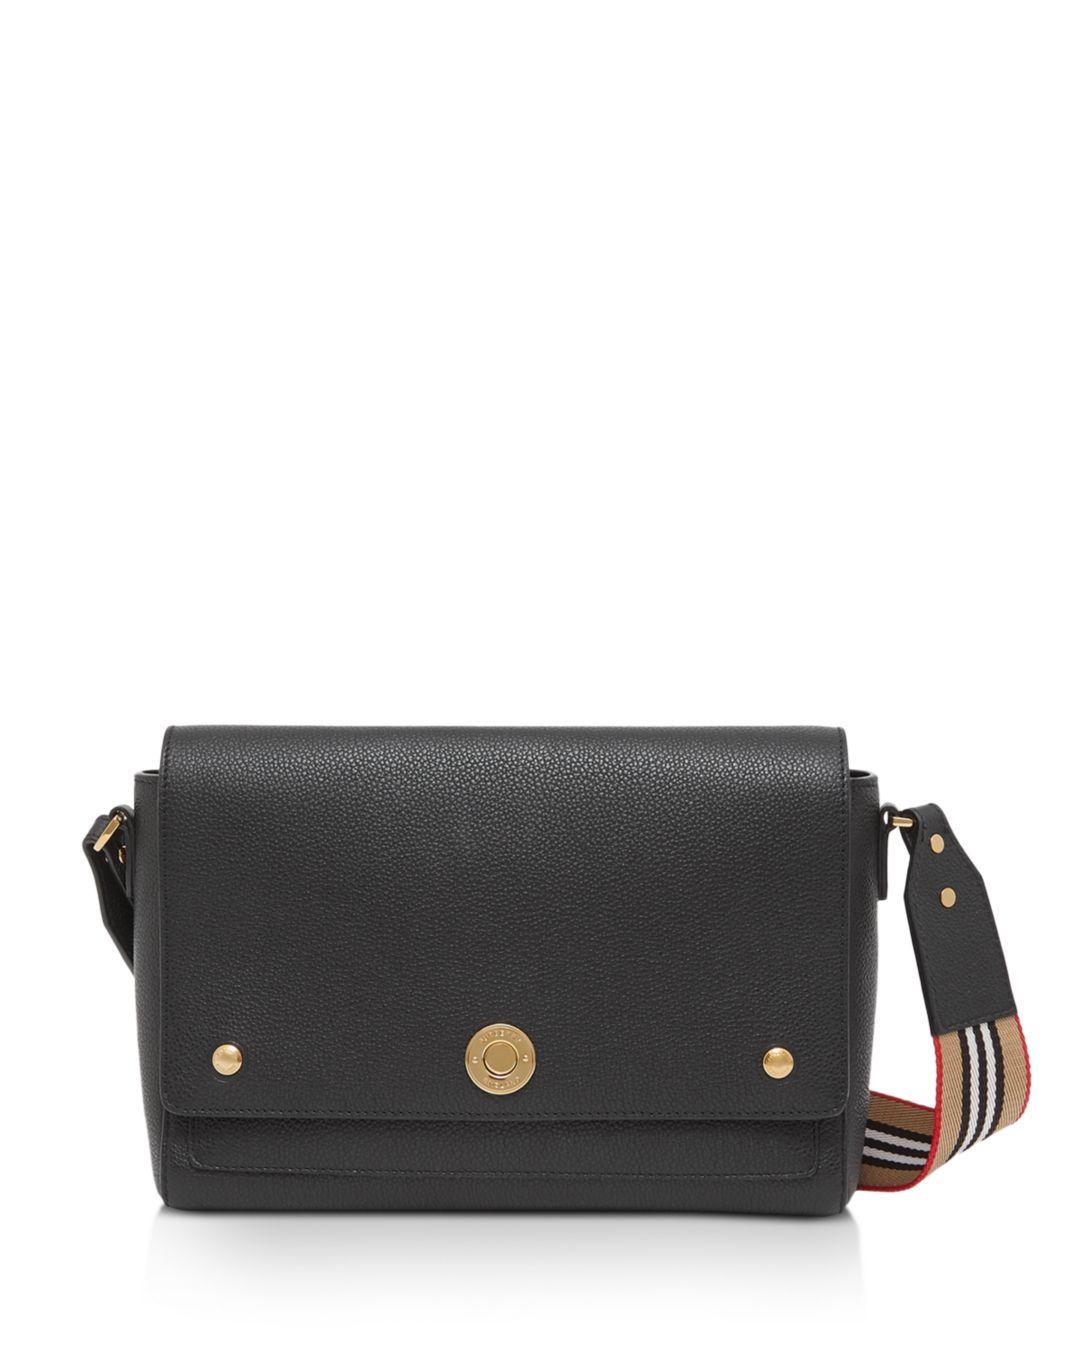 Burberry Grainy Leather Note Crossbody Bag# in Black/Gold (Black) | Lyst